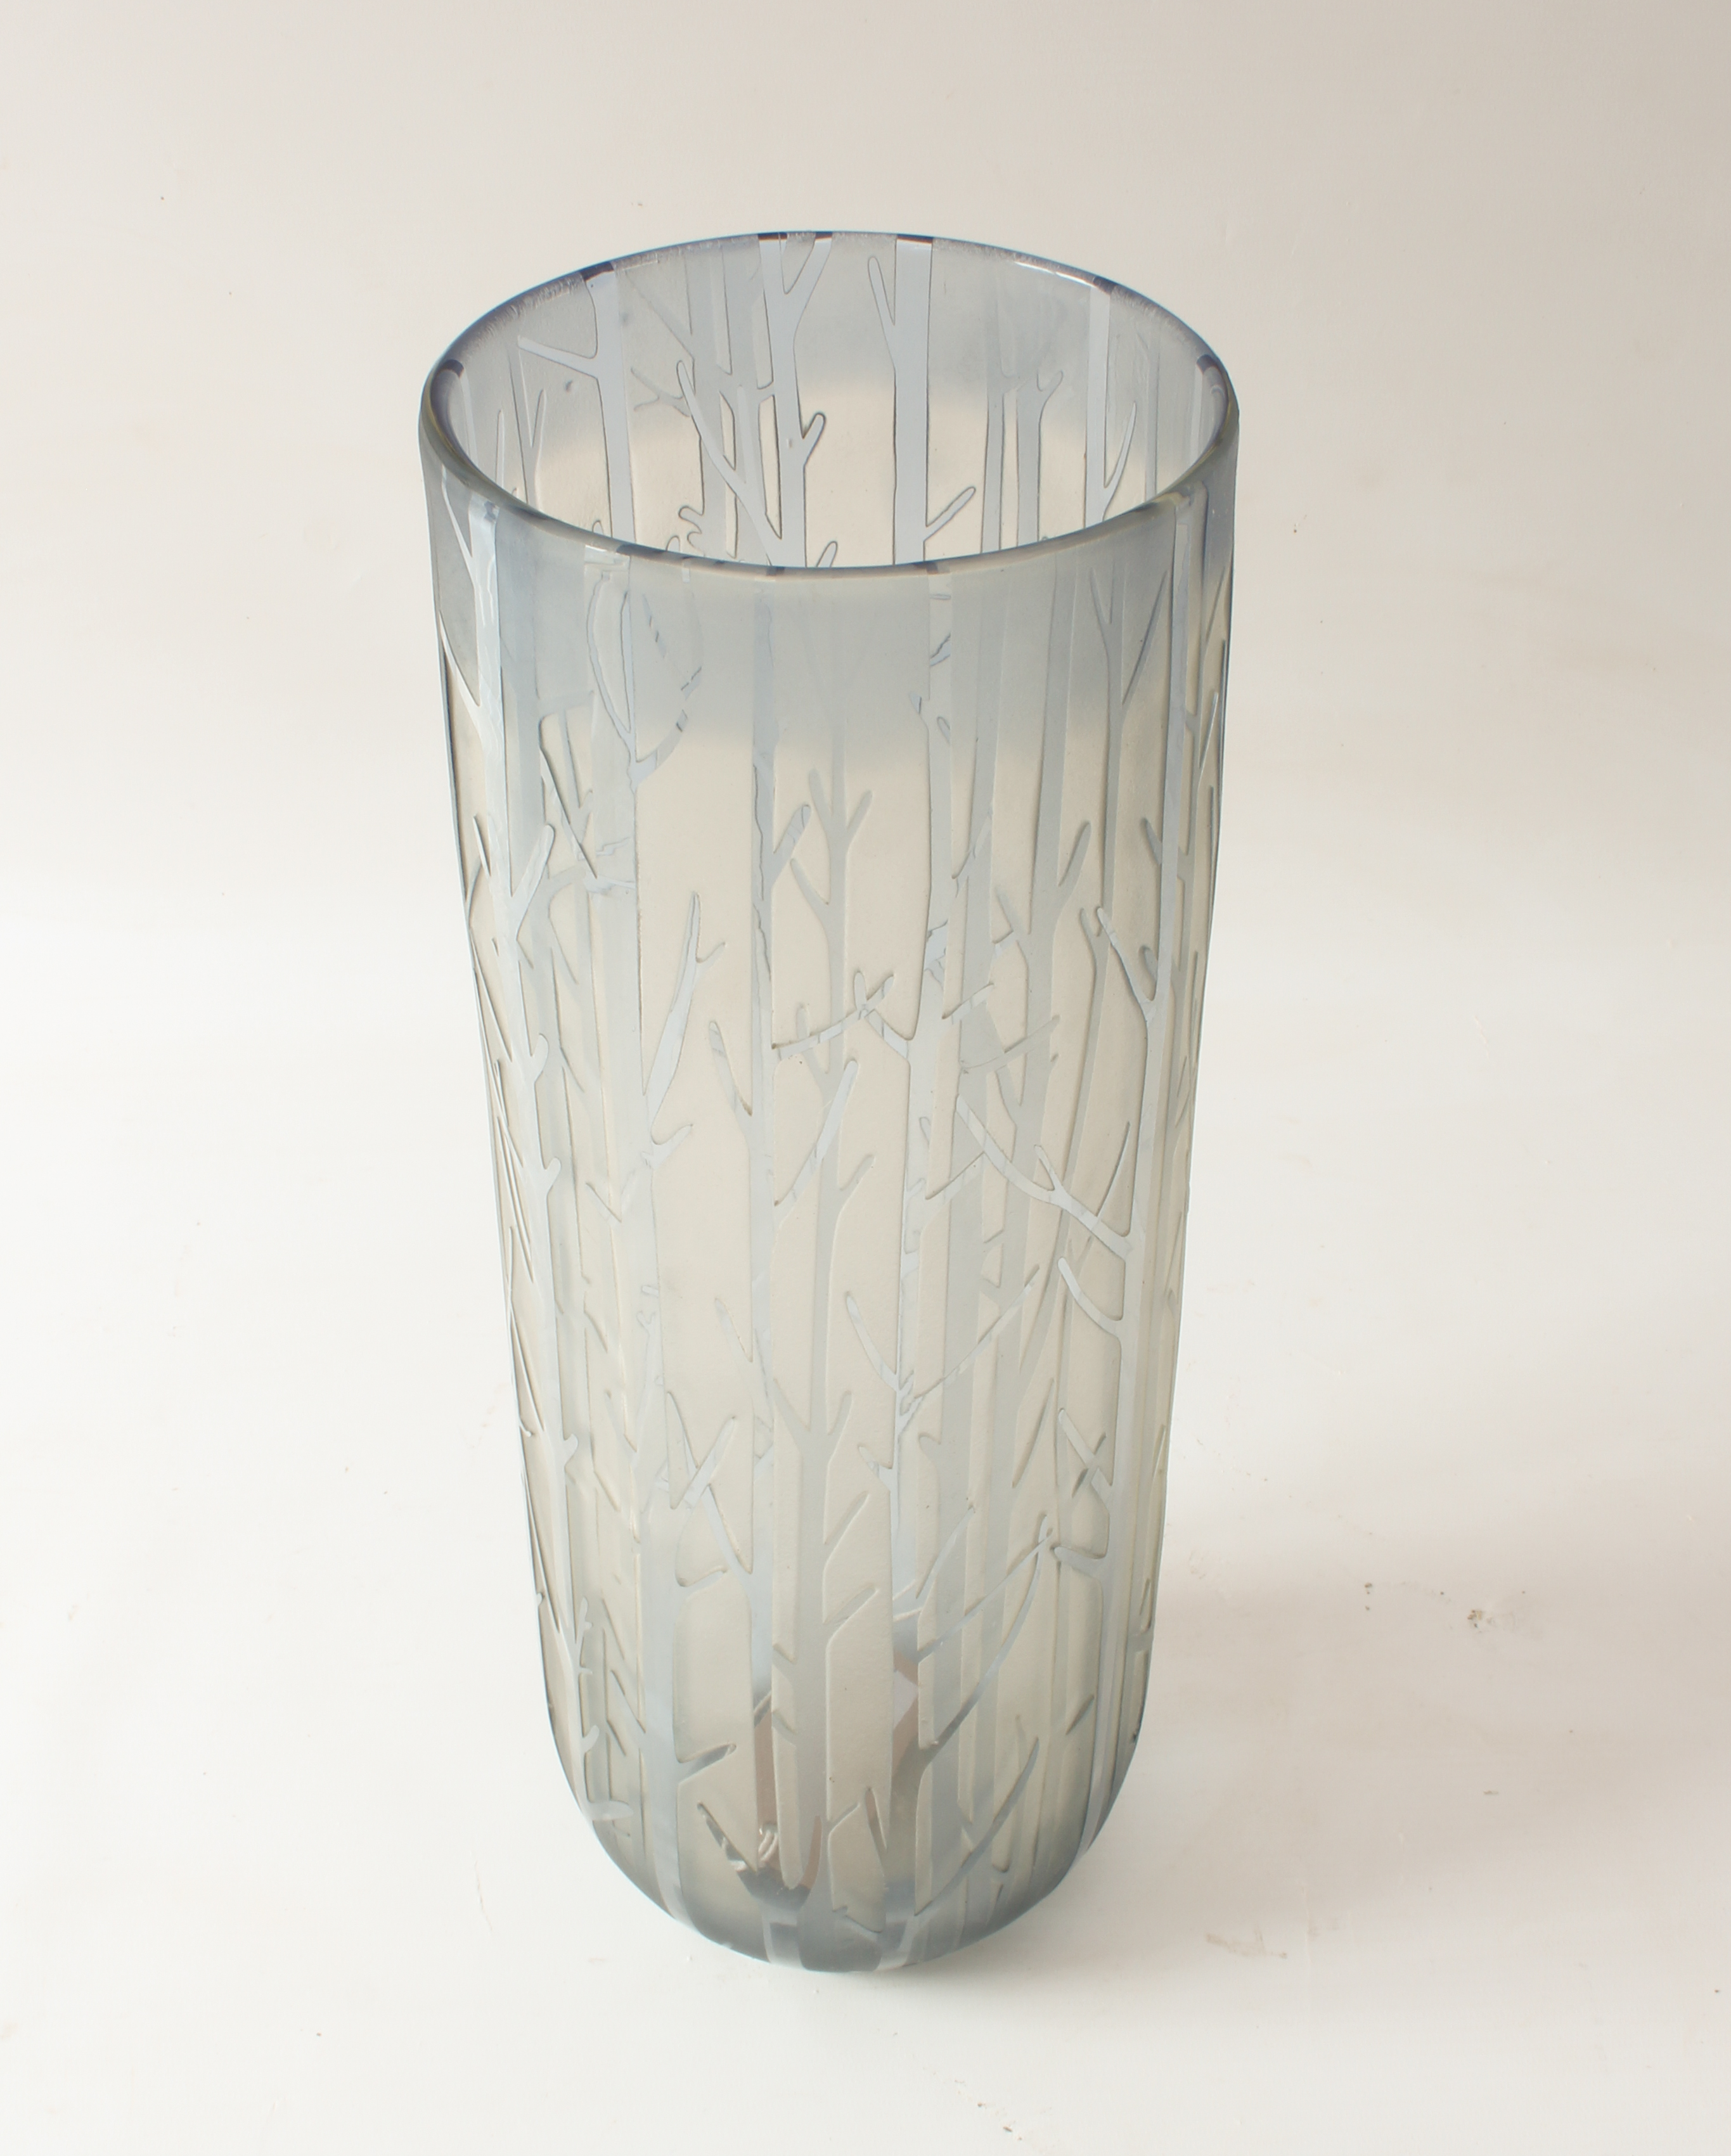 A large frosted glass art vase - of tall, cylindrical form, in clear glass with very pale steel blue - Image 2 of 4